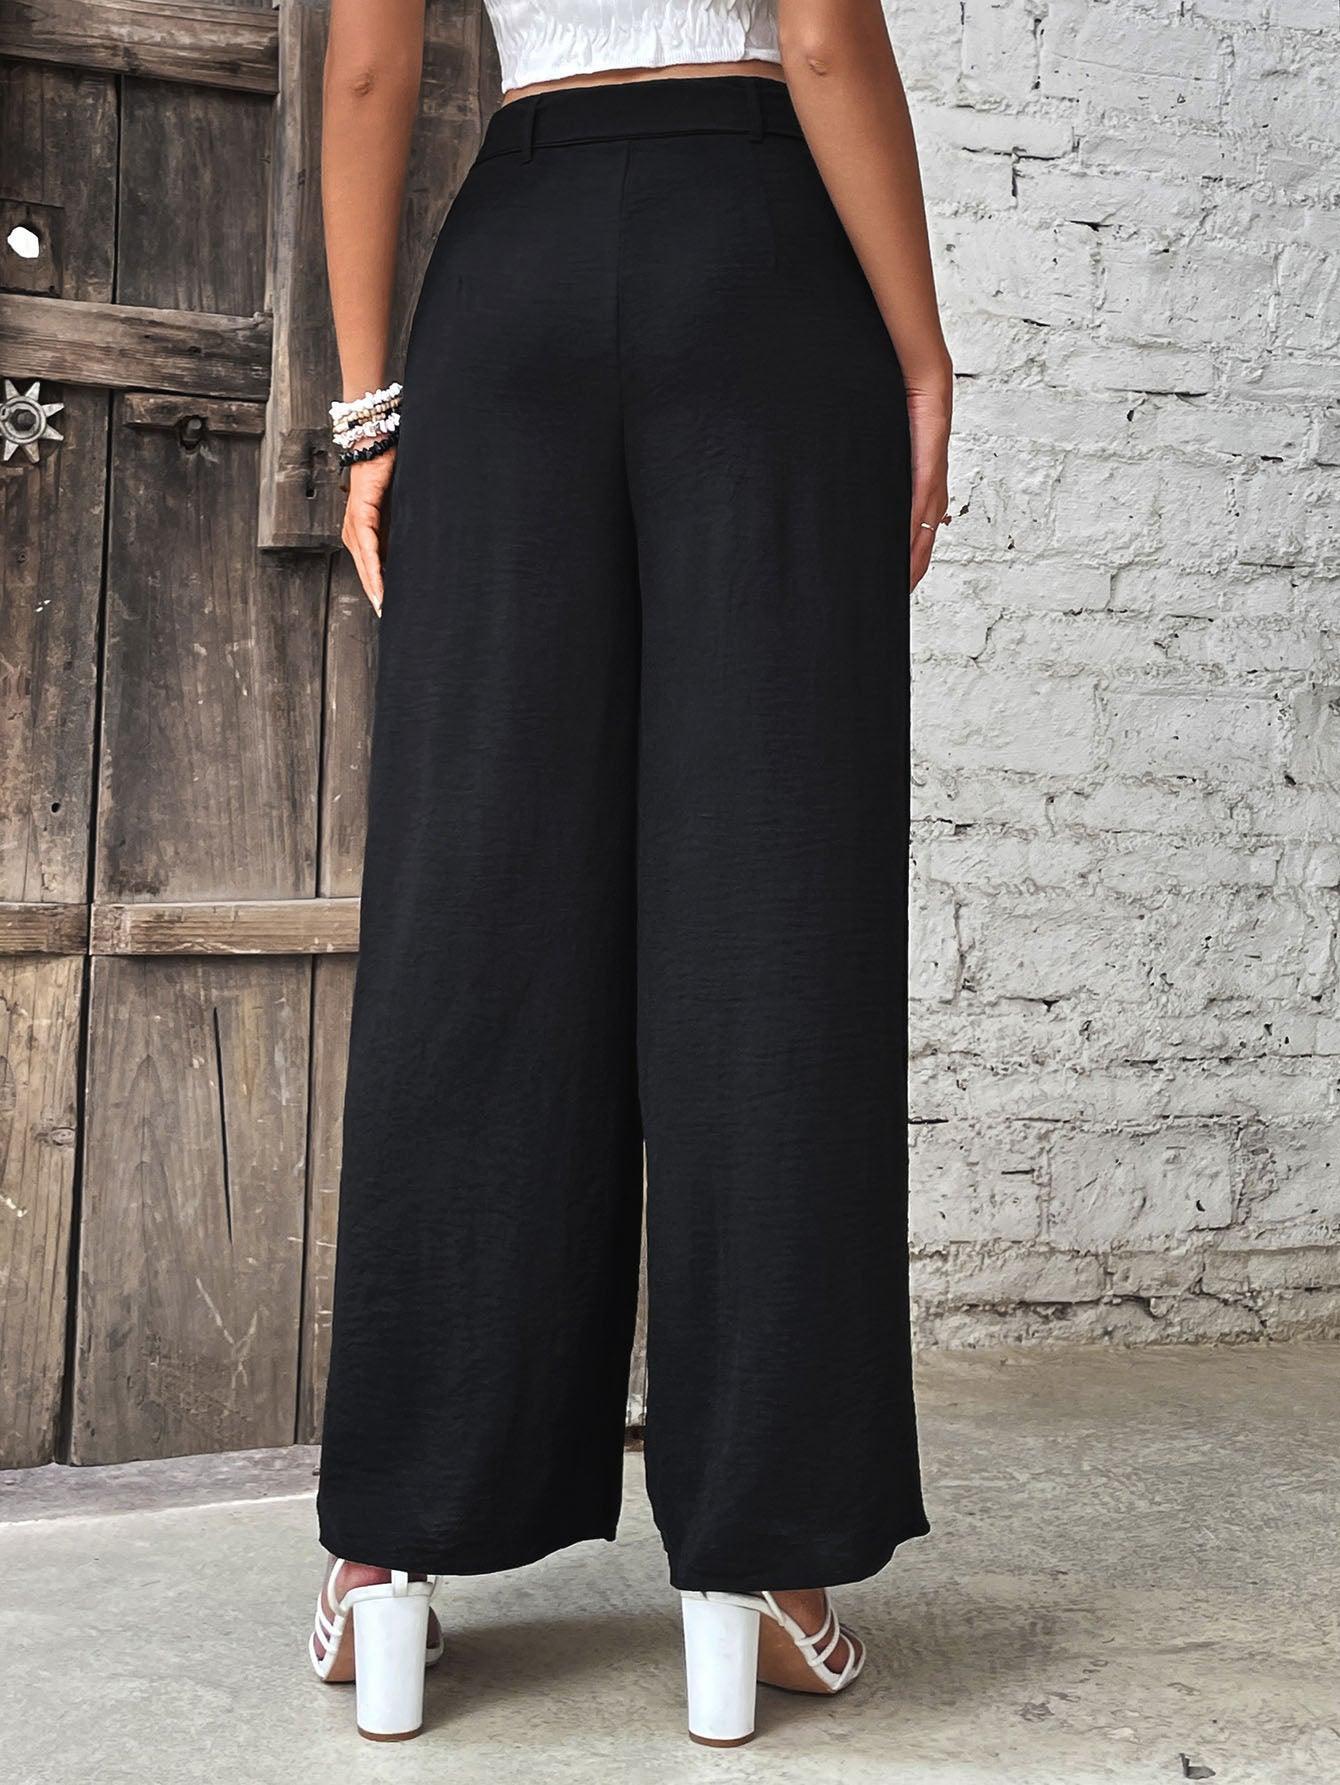 Unbothered Queen Black High Waisted Palazzo Pants - MXSTUDIO.COM